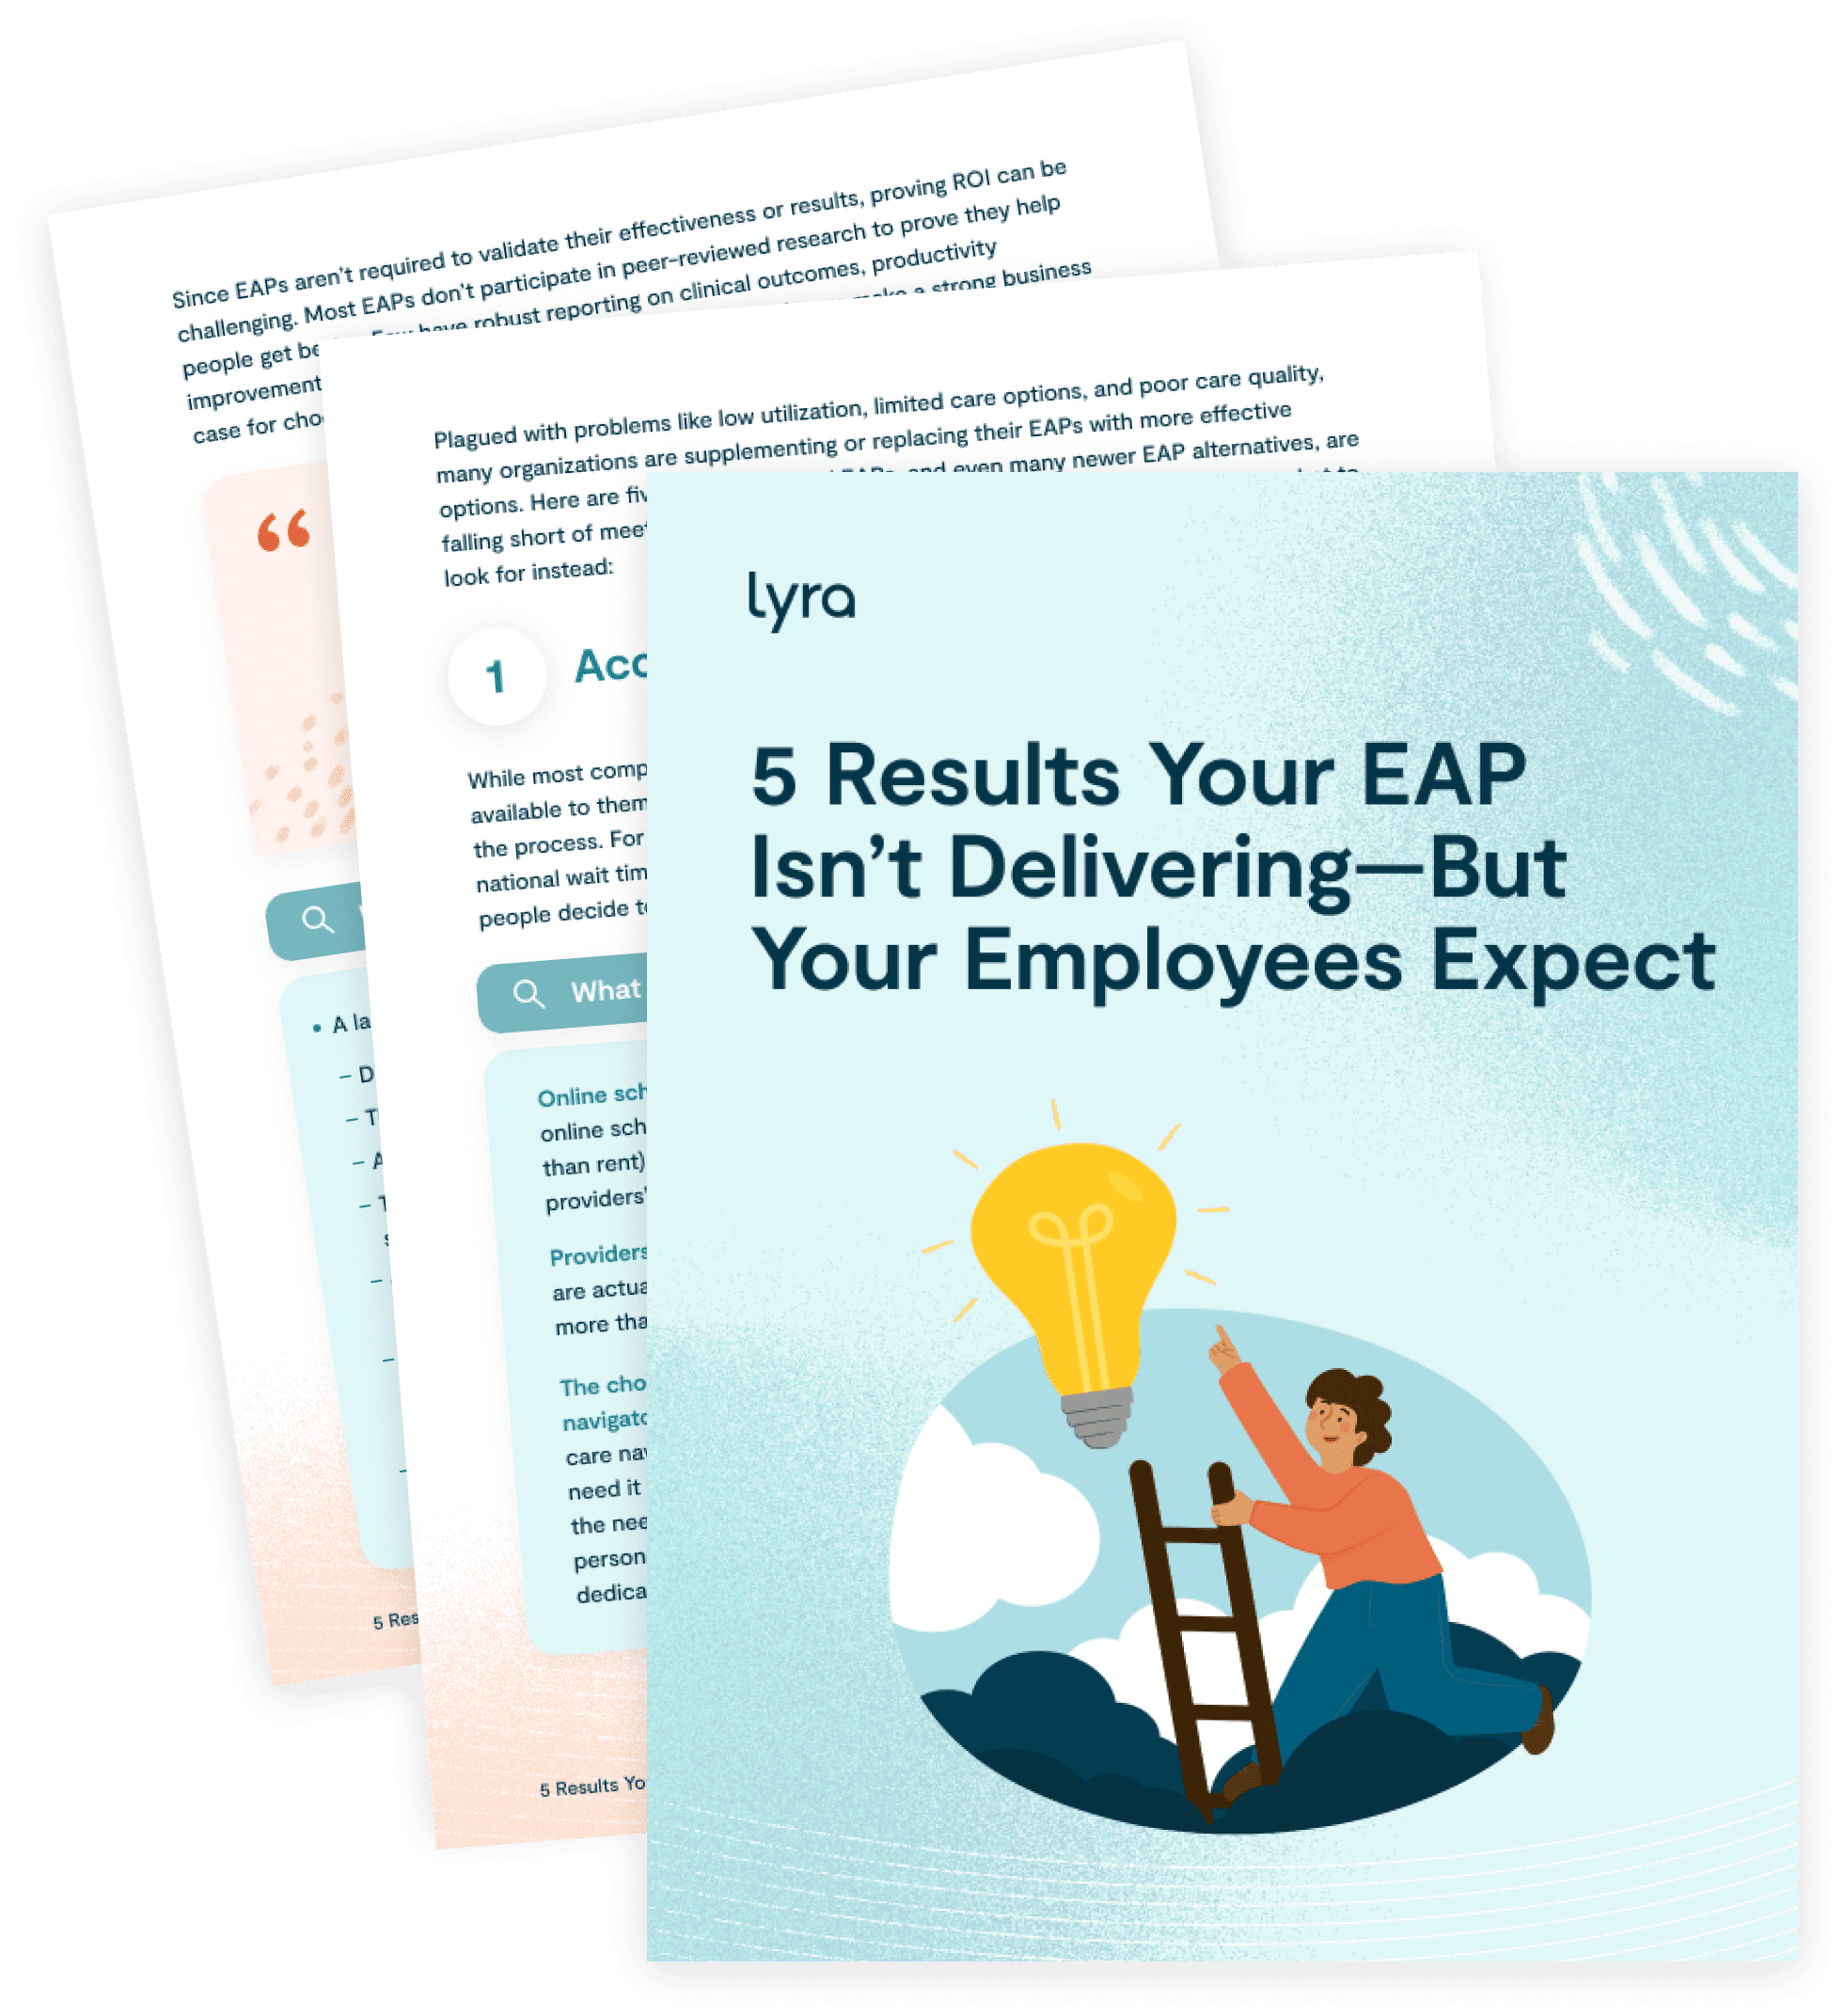 5 Results Your EAP Isn't Delivering thumbnail